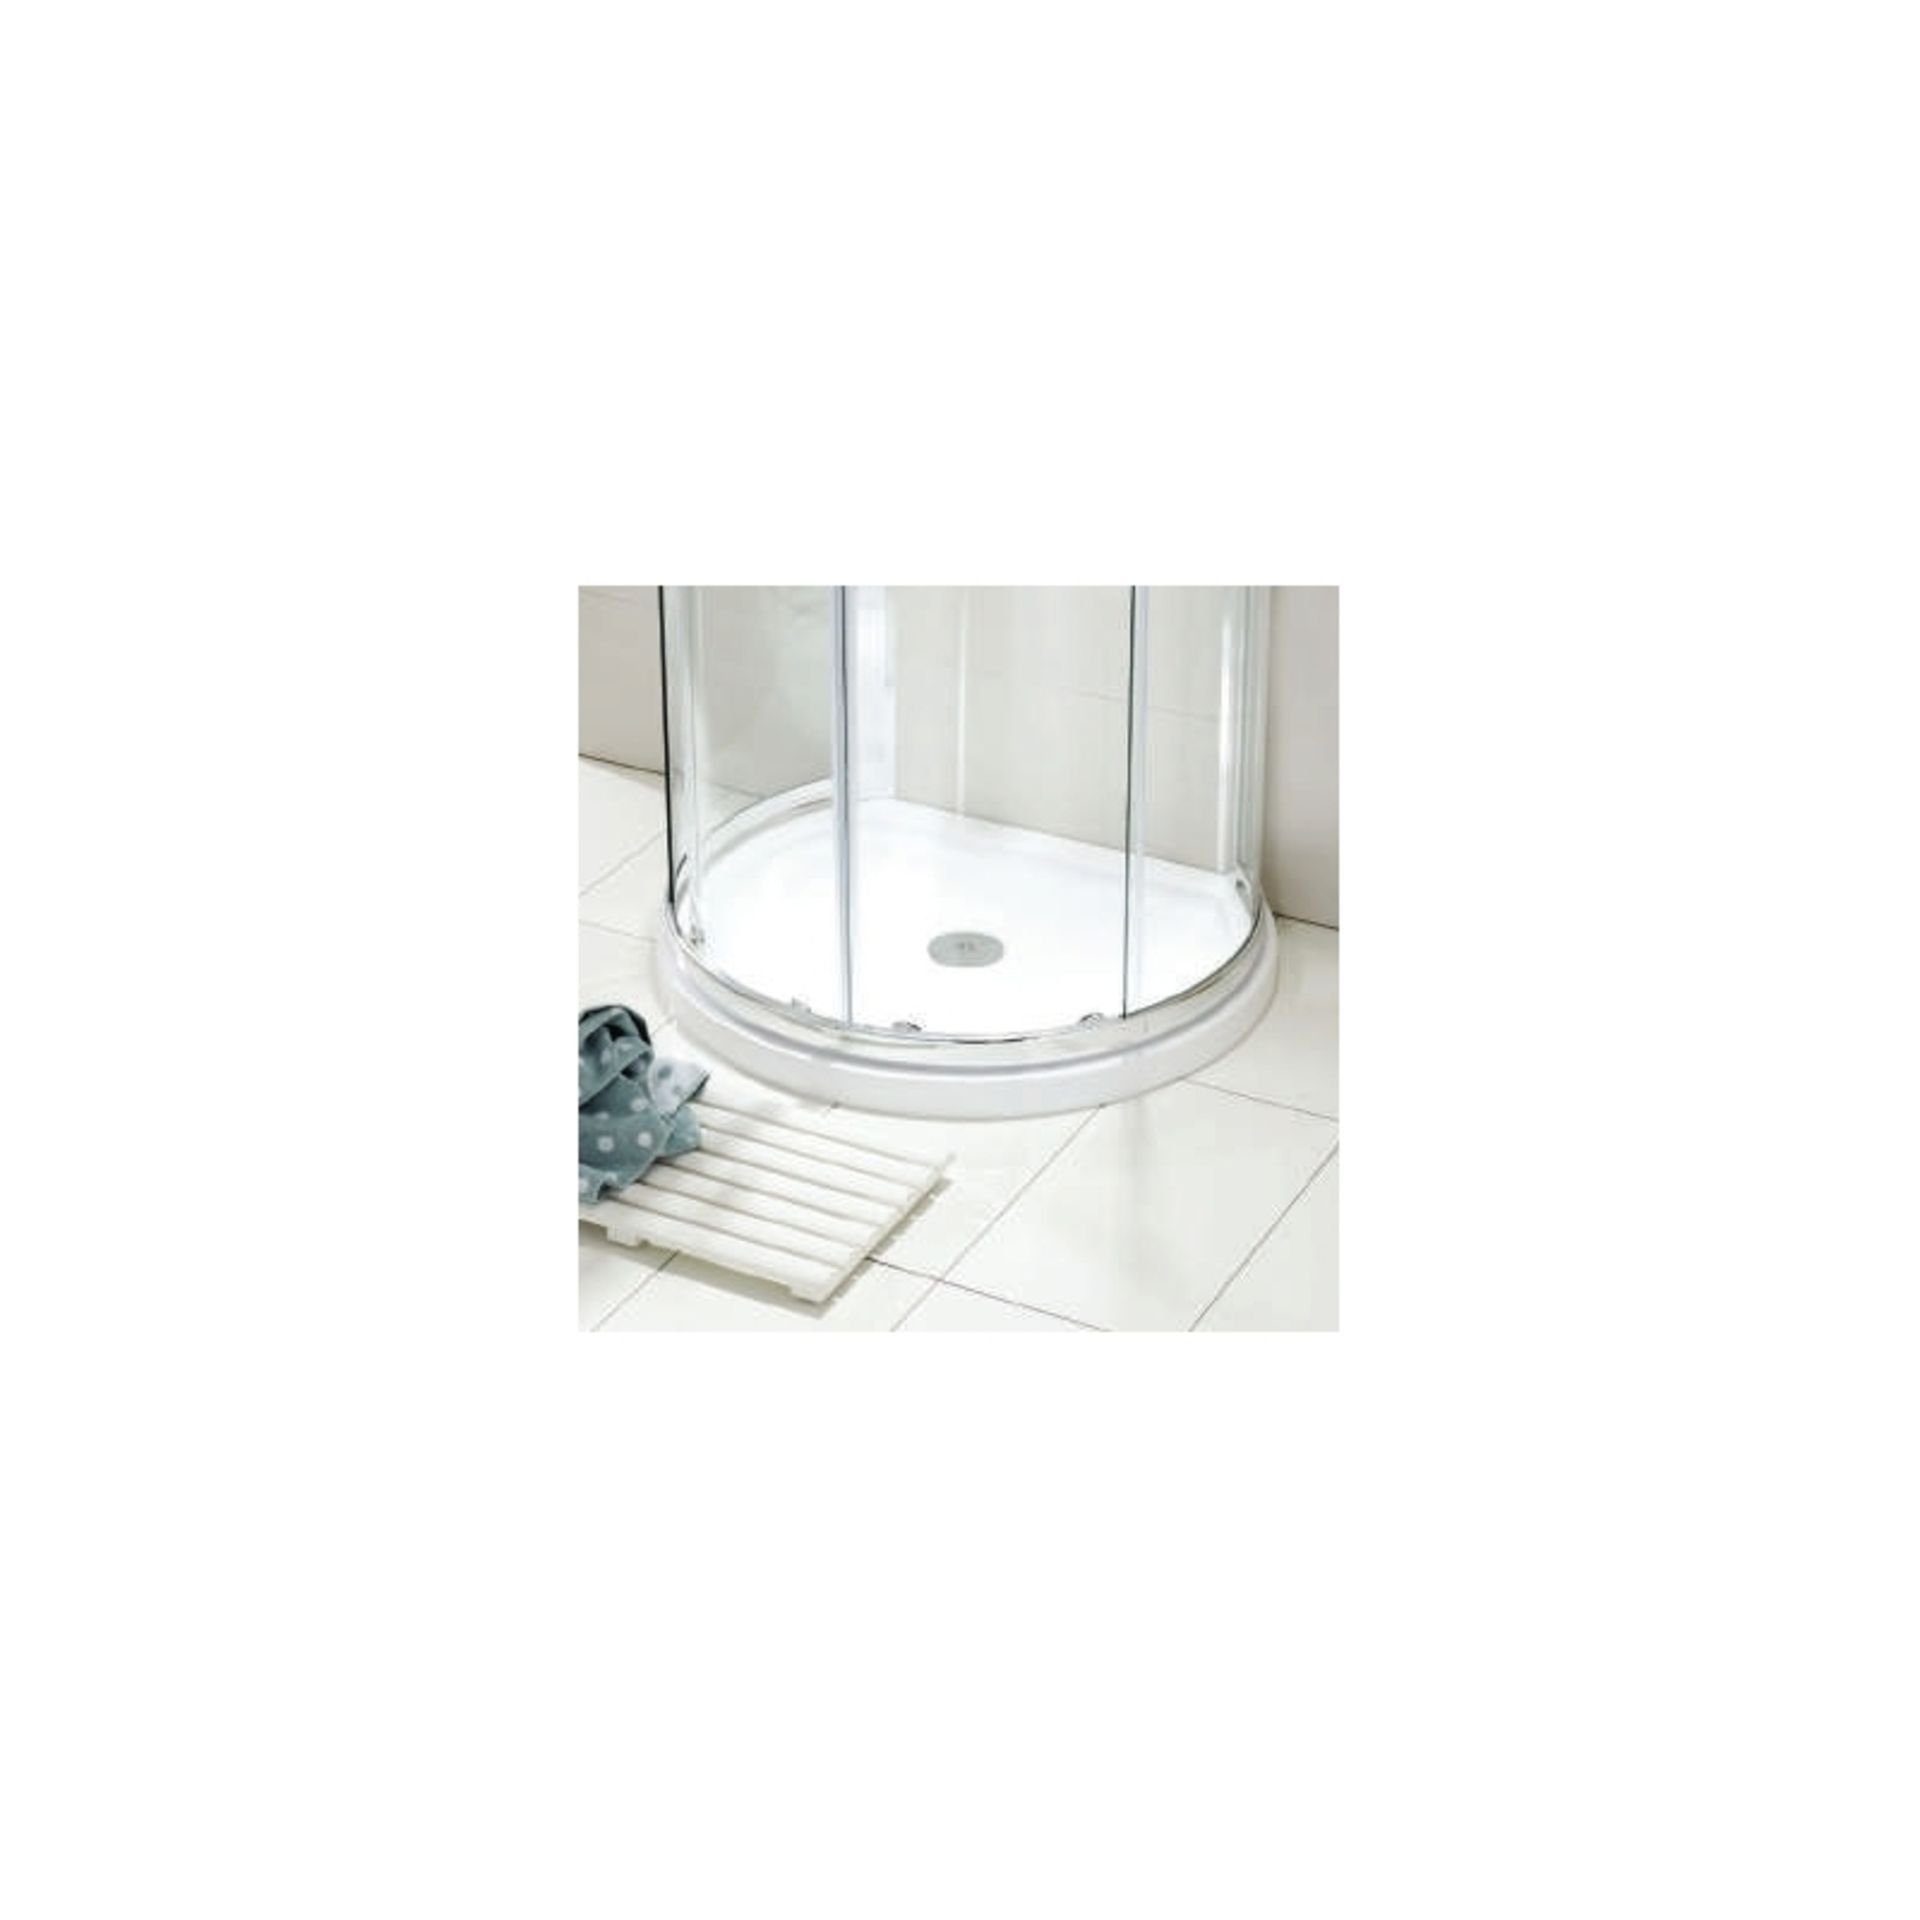 NEW (PC129) Twyfords 770mm Hydro D Shape White Shower tray.Low profile ultra slim design Gel co... - Image 2 of 3